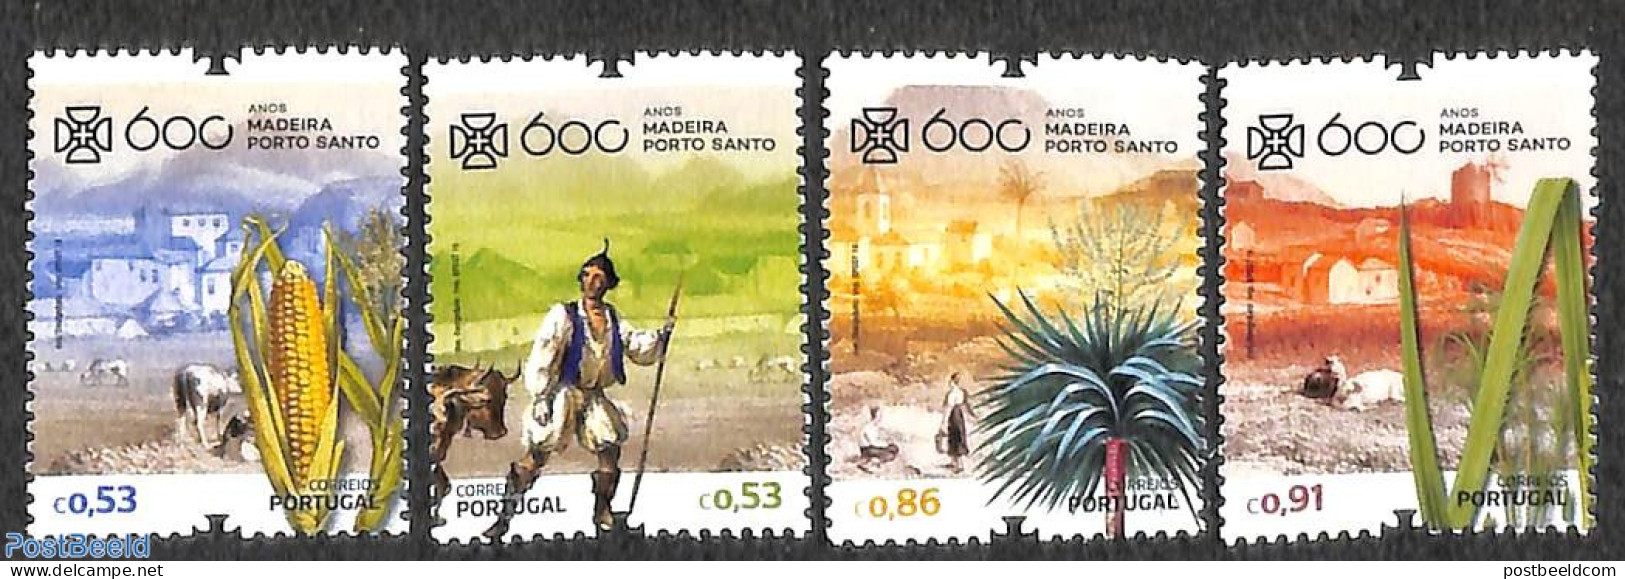 Madeira 2018 600 Years Re-discovery Of Madeira 4v, Mint NH - Madeira